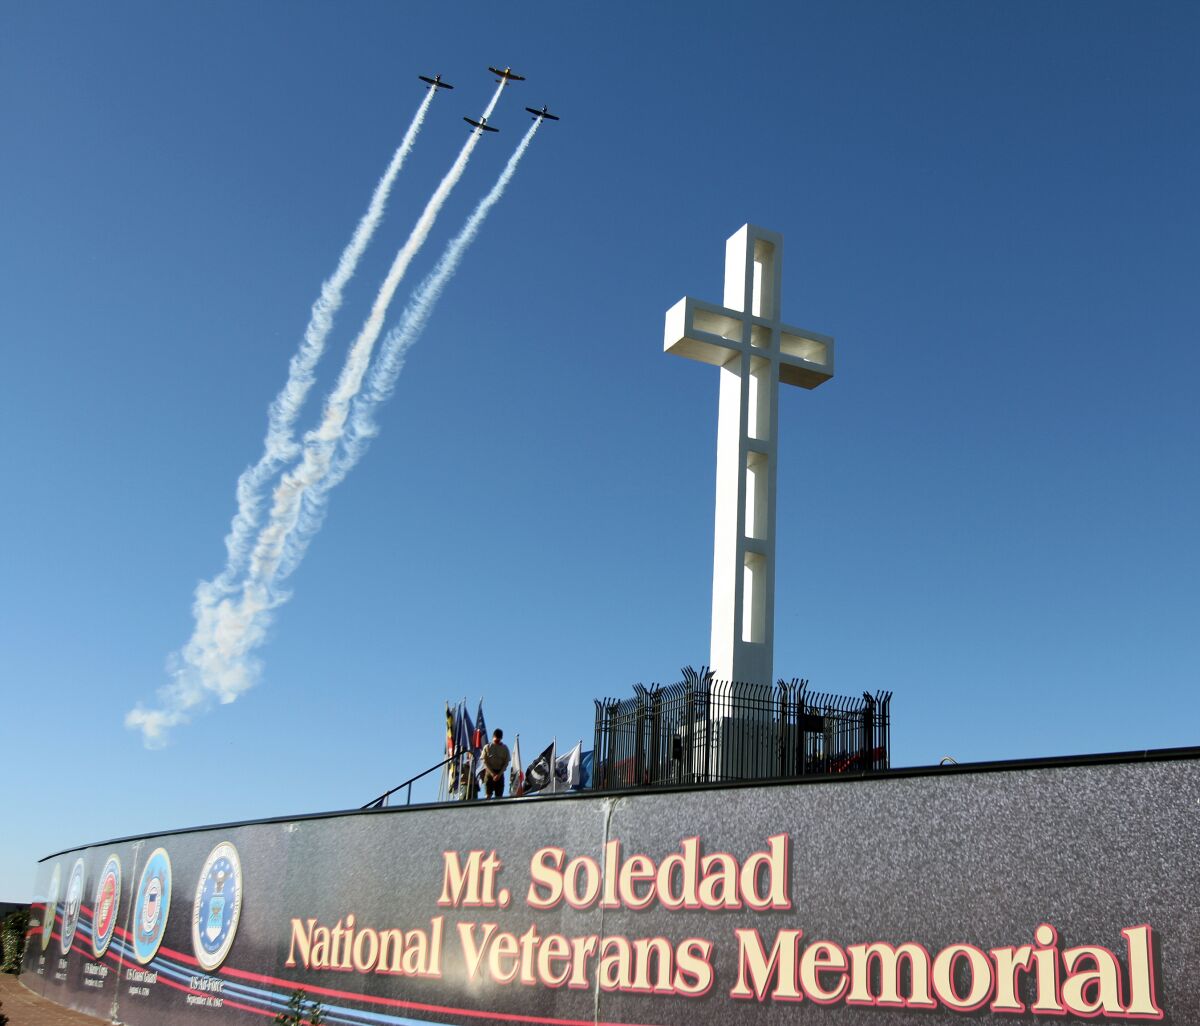 A Memorial Day event will be held Monday, May 30, at the Mount Soledad National Veterans Memorial and online.